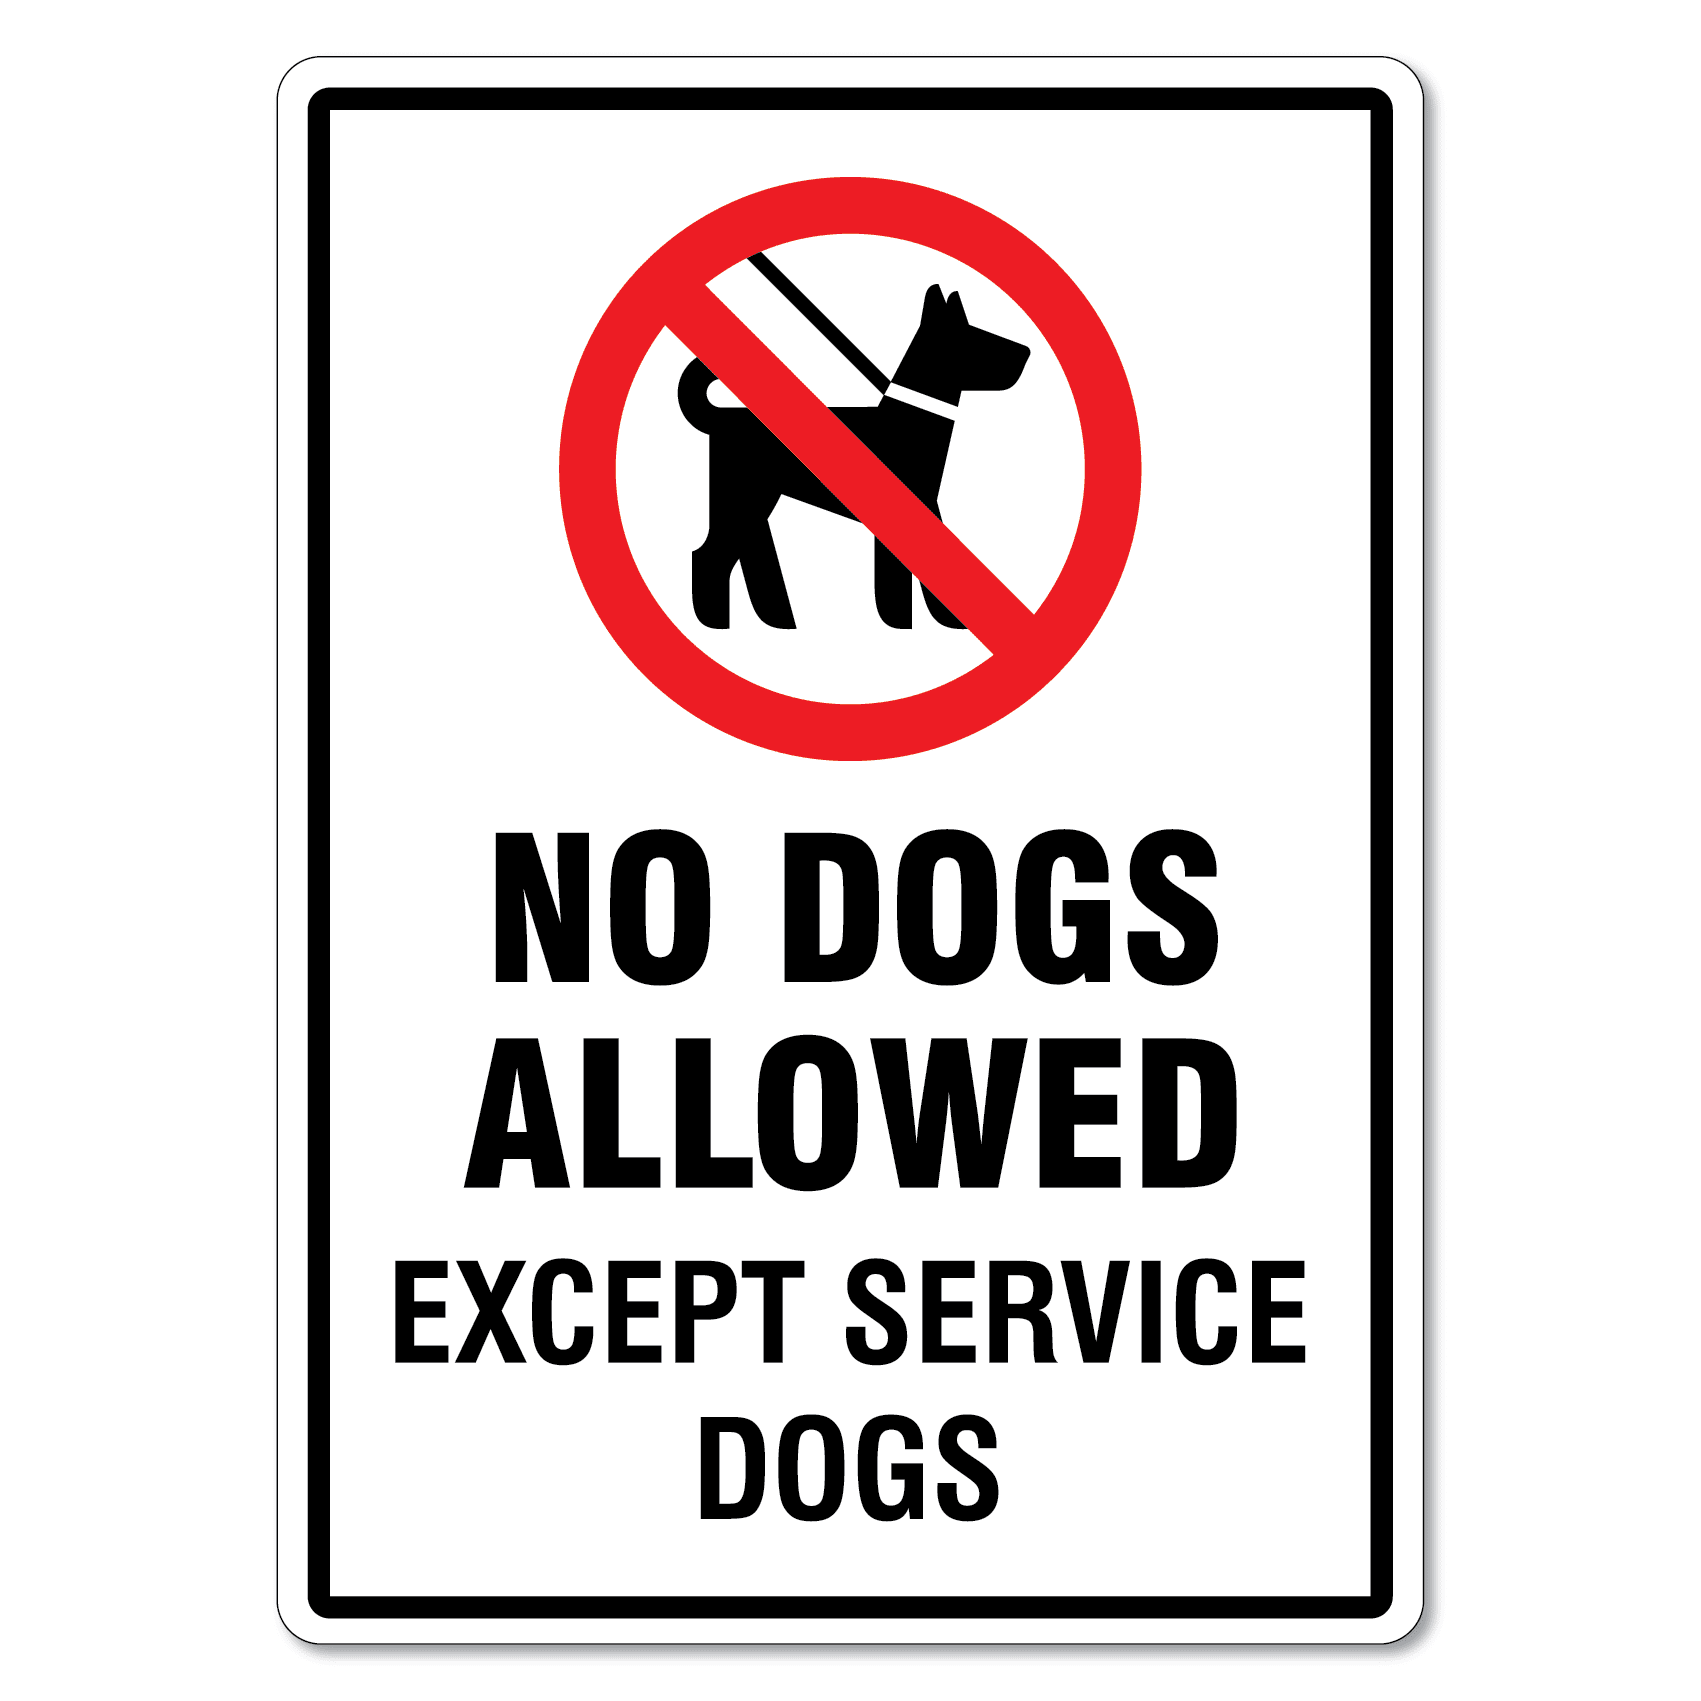 where are service dogs allowed